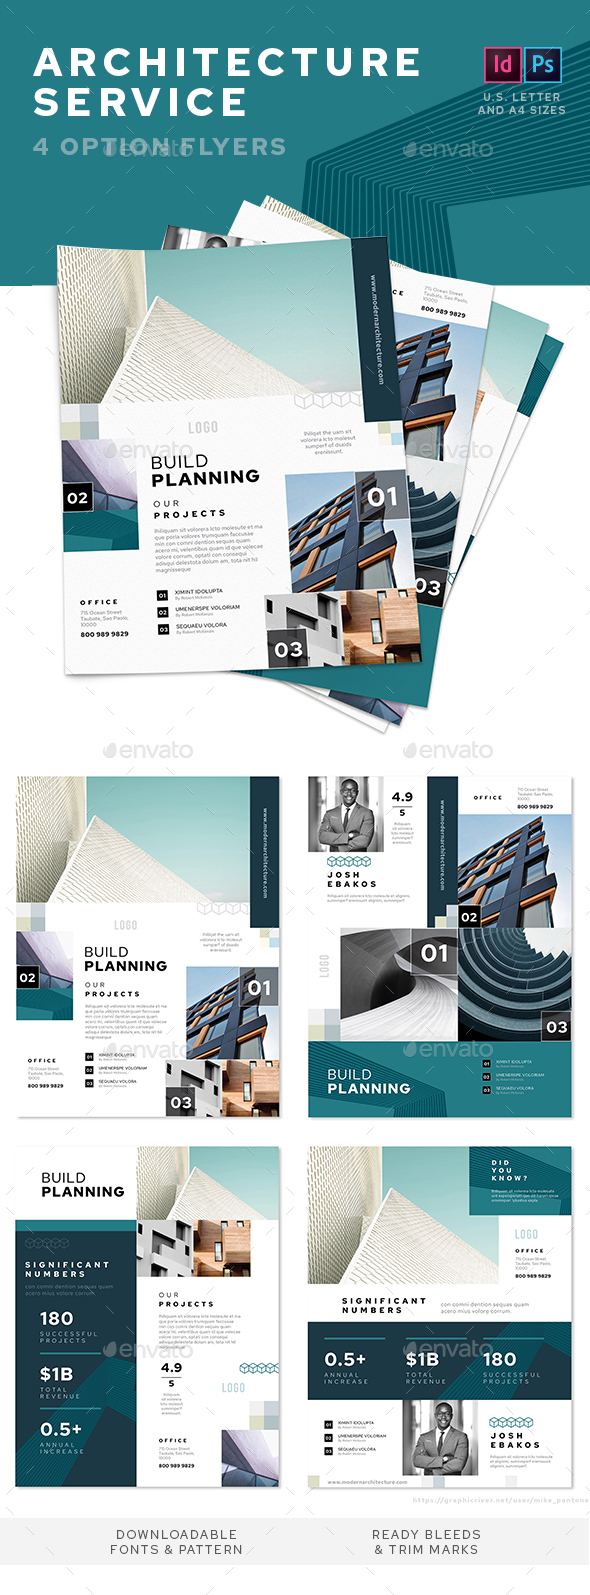 Architecture Service Flyers – 4 Options